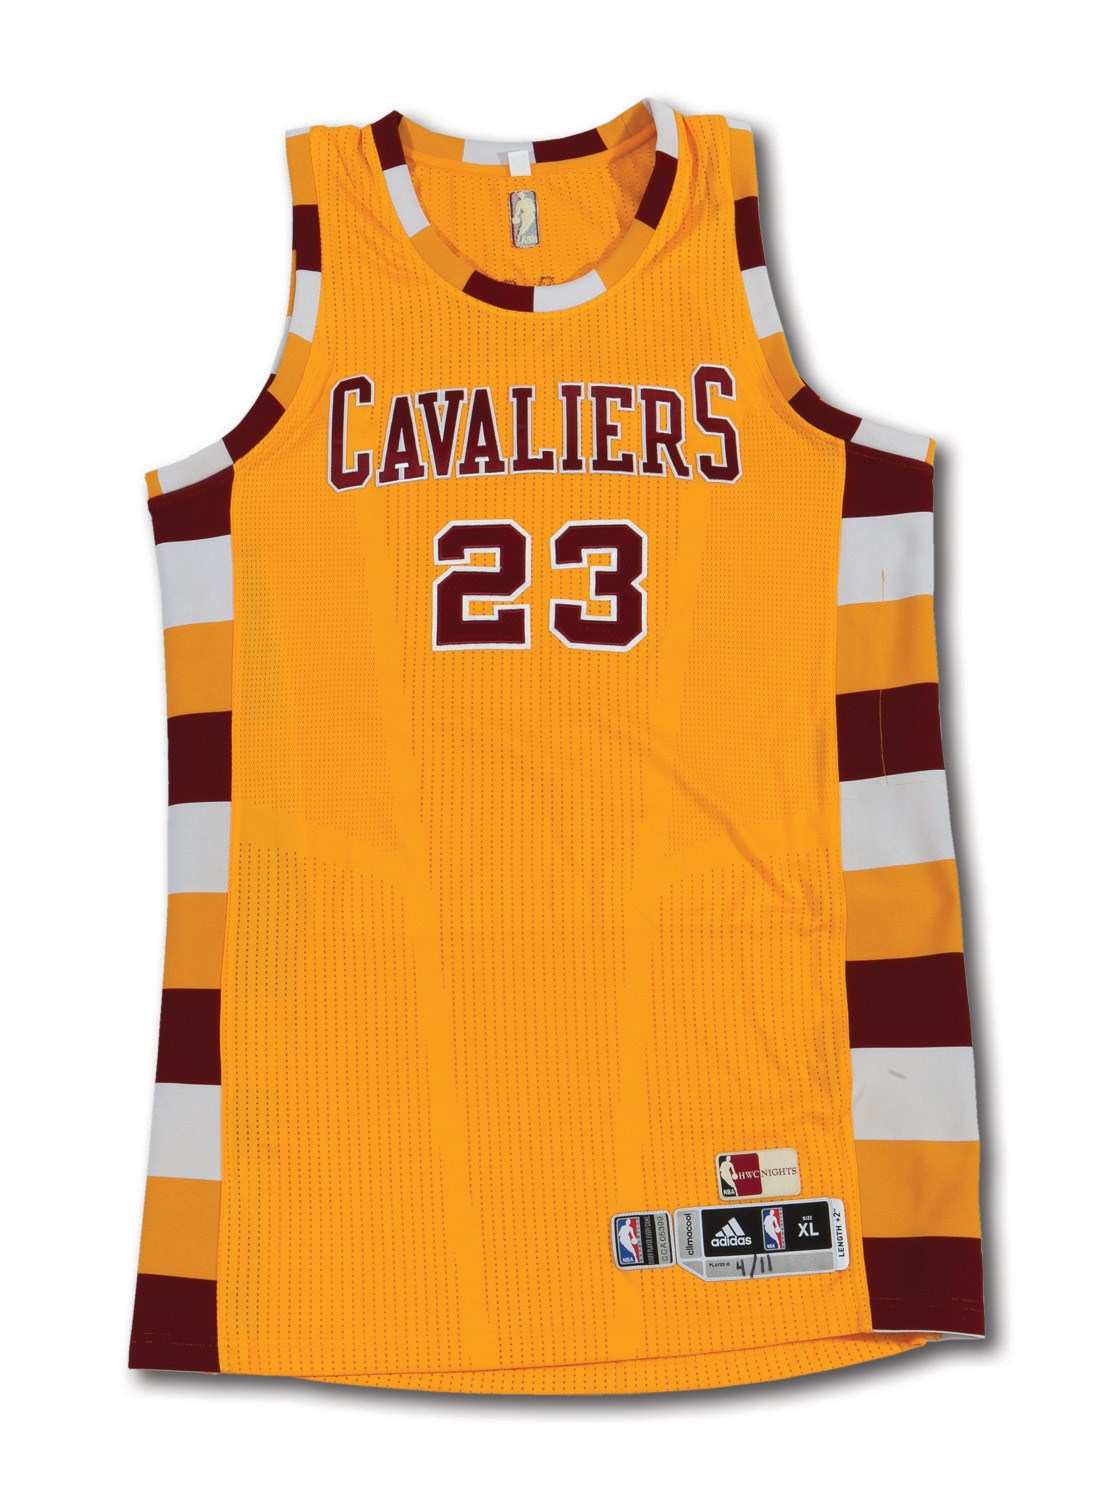 Jersey for the Cleveland Cavaliers worn and signed by LeBron James